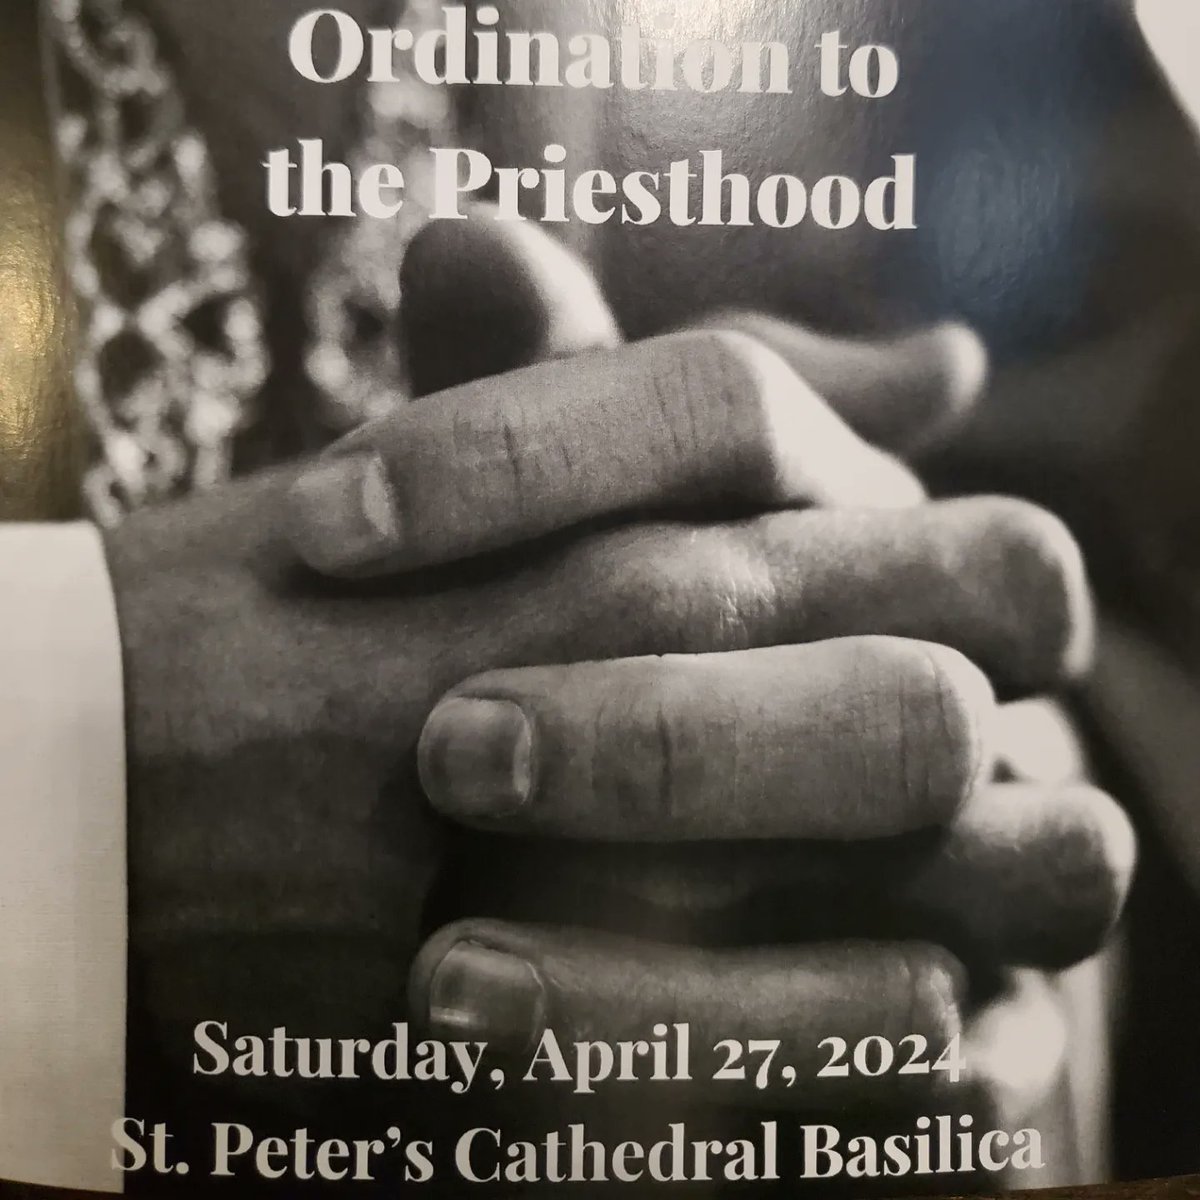 Today we are gathered in joyful anticipation of the ordination to the priesthood of James, Matthew and TJ. Many are already receiving a warm welcome at the cathedral. Join us on the livestream if you can't be here in person. The link is posted at dol.ca.